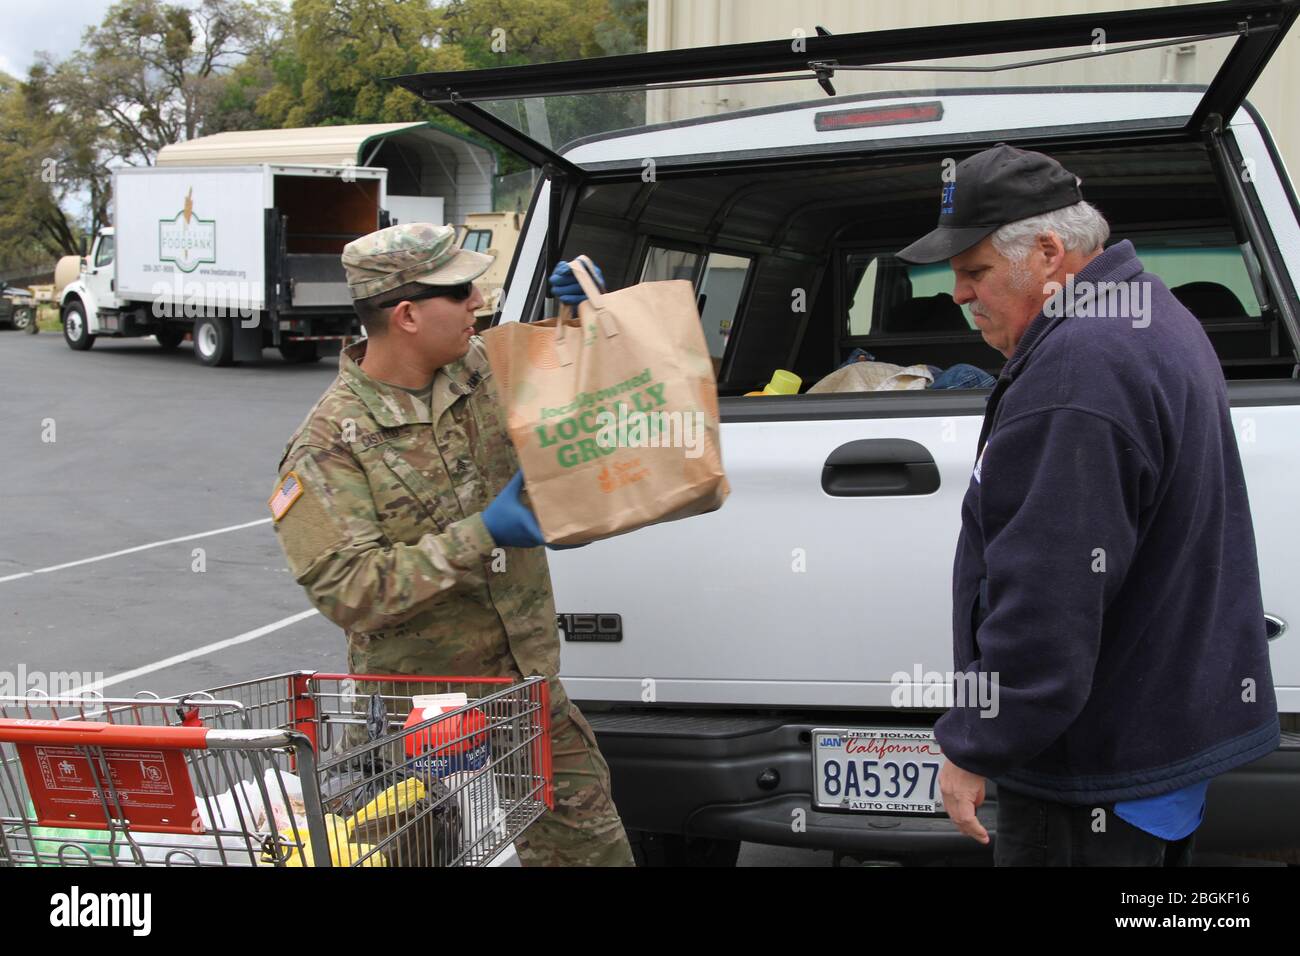 U.S. Army Sgt. Moises Castillo of the California Army National Guard’s 1040th Quartermaster Company, 340th Brigade Support Battalion, 115th Regional Support Group, helps an Amador County resident load food supplies into a vehicle March 23 at the Interfaith Food Bank in Jackson, California. The Cal Guard ramped up its humanitarian support following the recent activation by Gov. Gavin Newsom’s call-up of the reserve component. (Army National Guard photo by Staff Sgt. Eddie Siguenza) Stock Photo